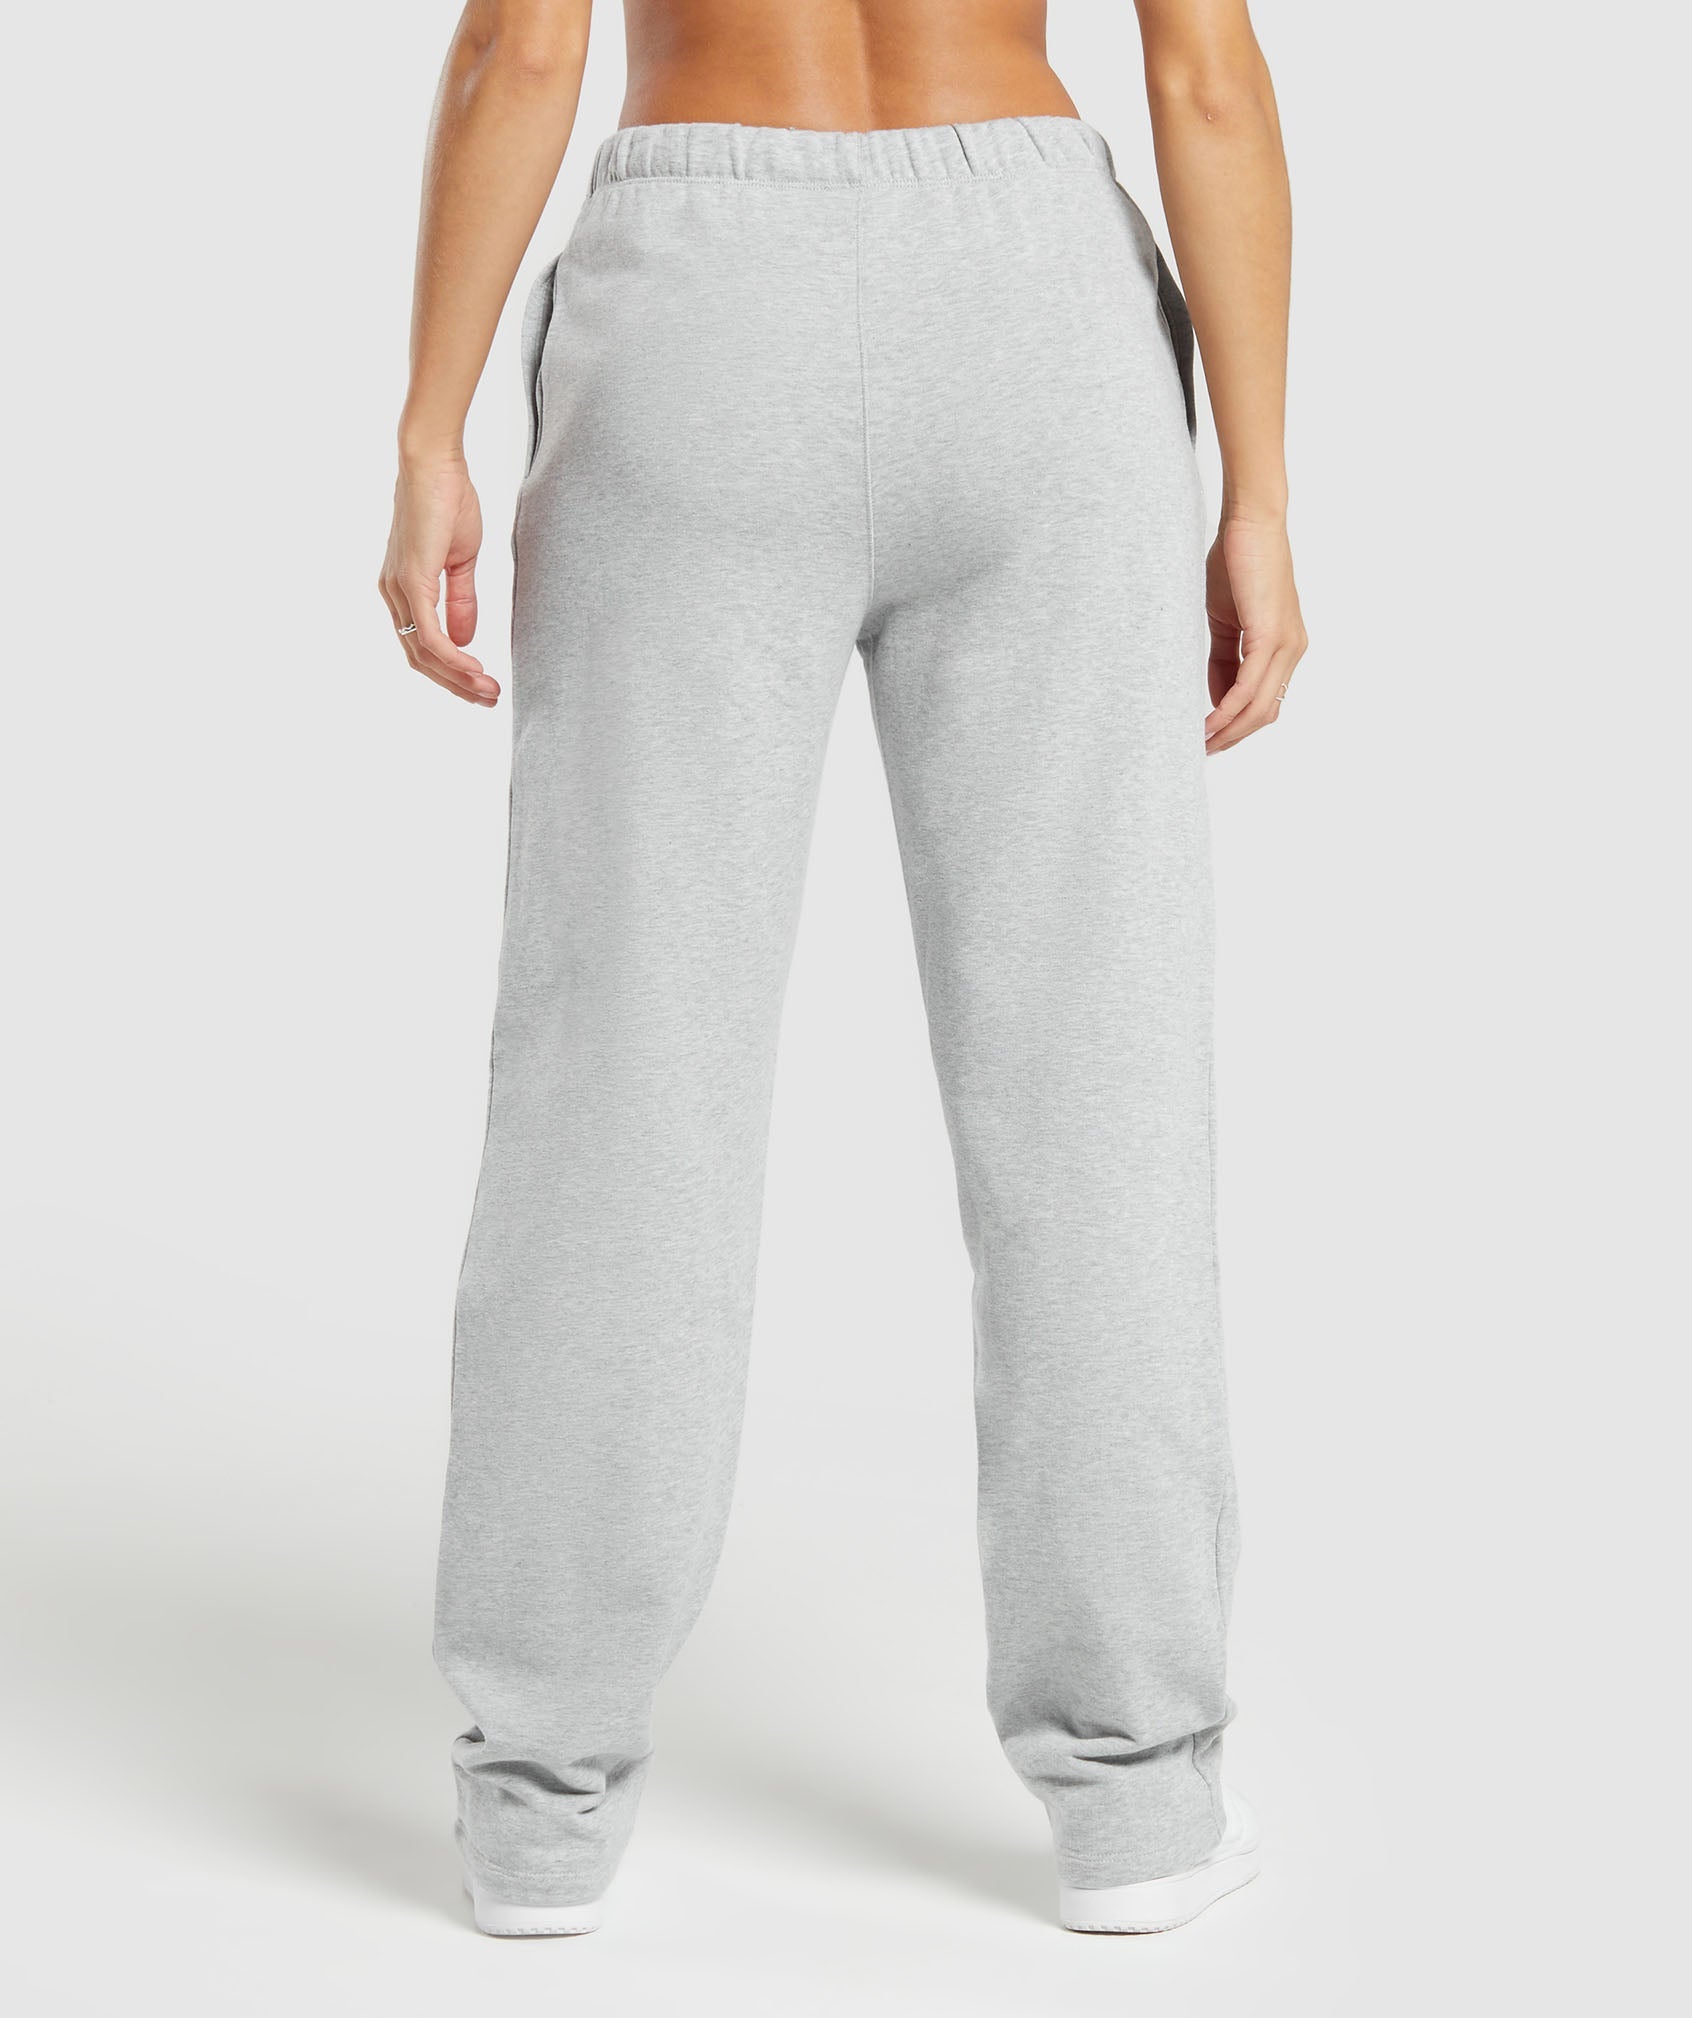 Lifting Straight Leg Joggers in Light Grey Core Marl - view 2